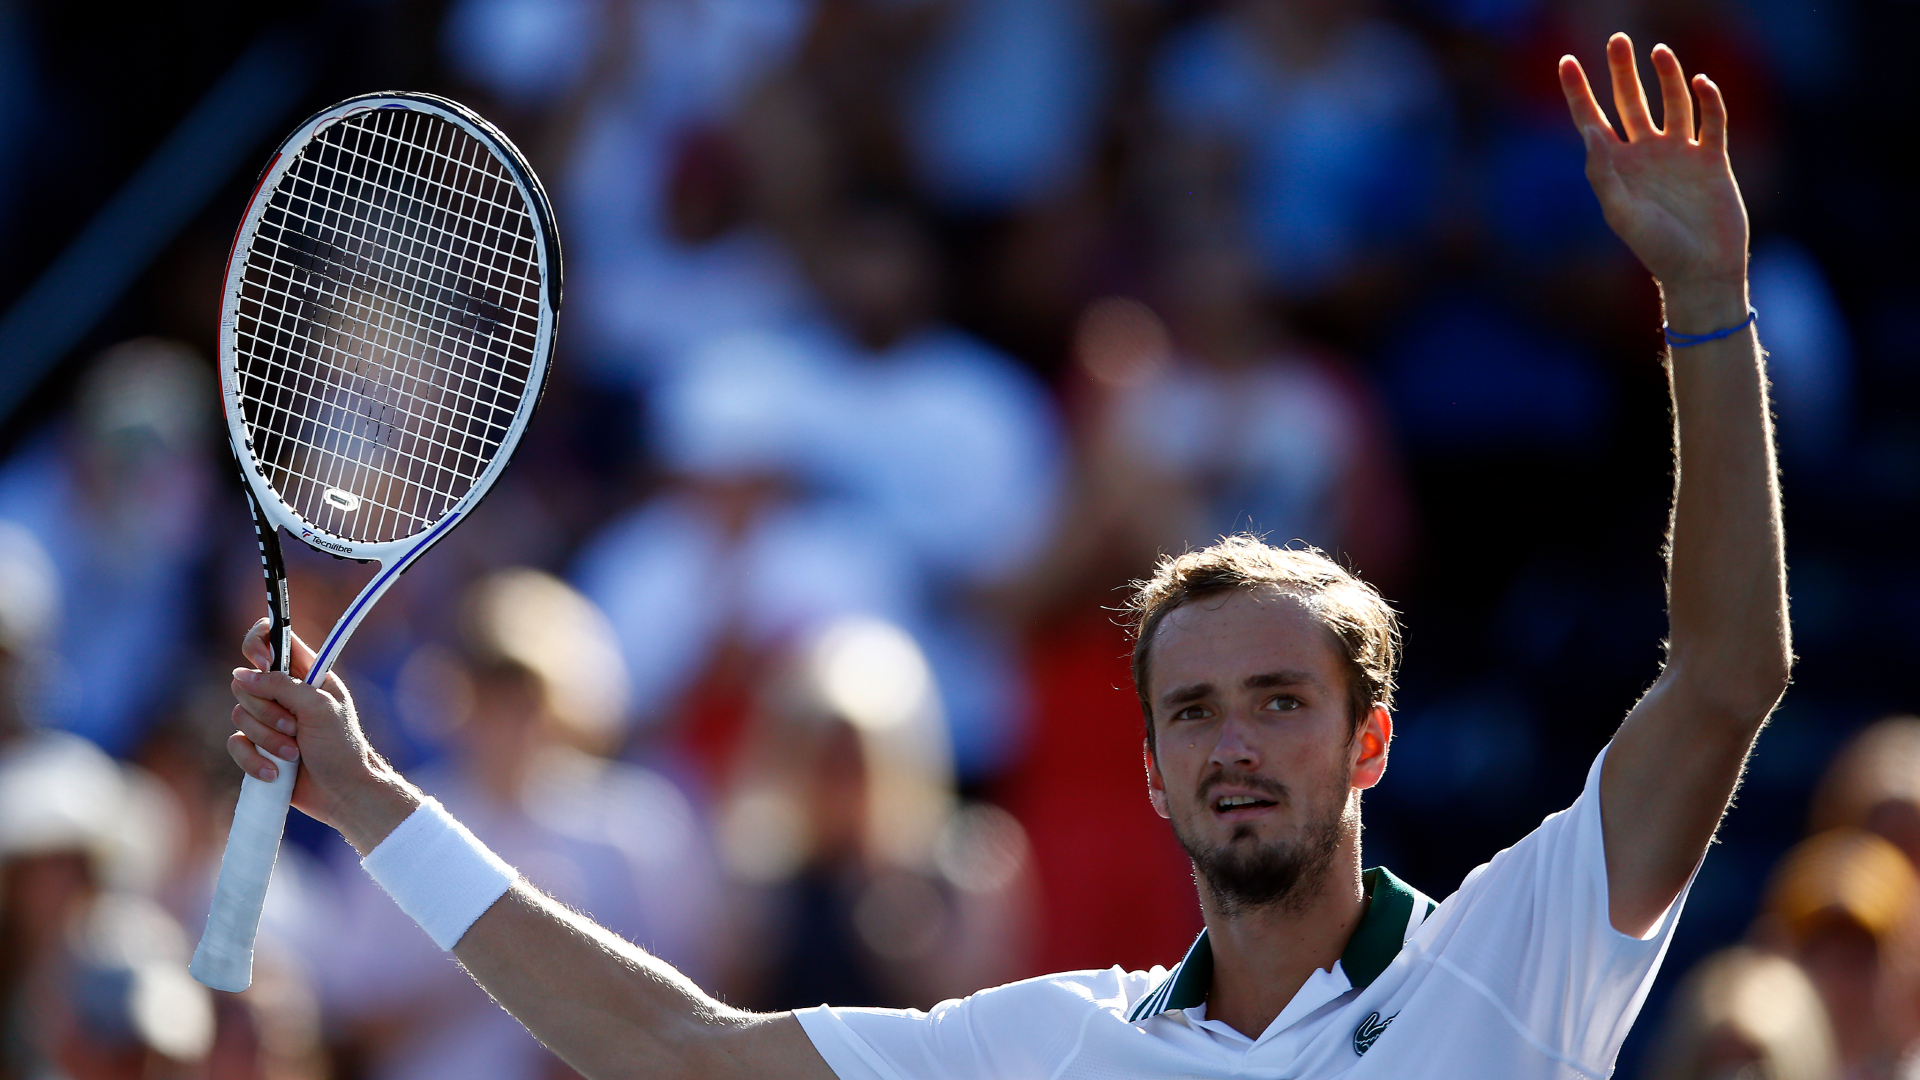 Reilly Opelka stunned Stefanos Tsitsipas in the National Bank Open semis, but Daniil Medvedev proved a challenge too far in the final.